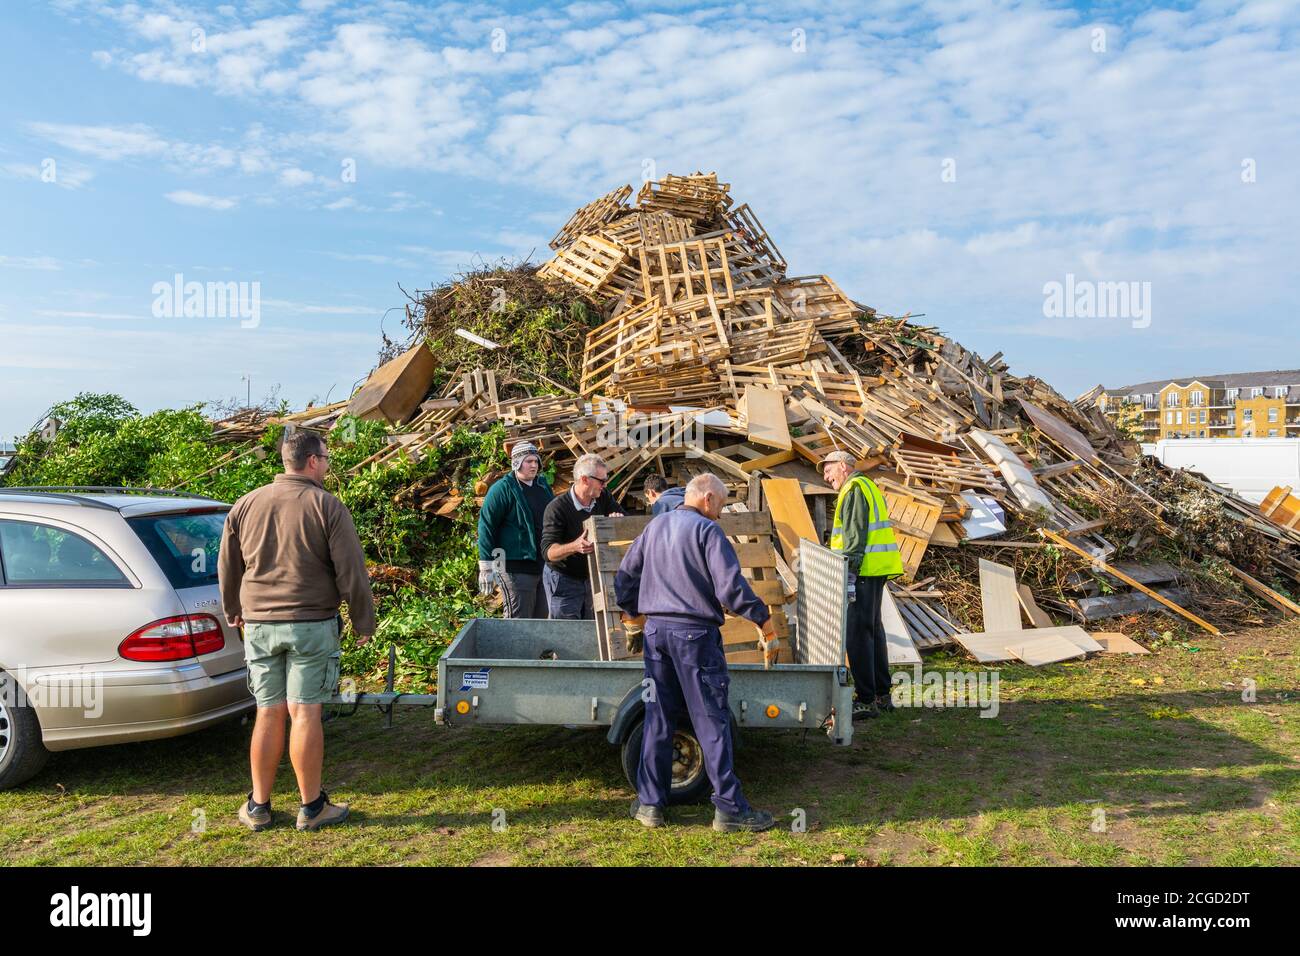 Building a large bonfire ready for Bonfire Night celebrations i(Guy Fawkes Night) on the South Coast n Littlehampton, West Sussex, England, UK. Stock Photo